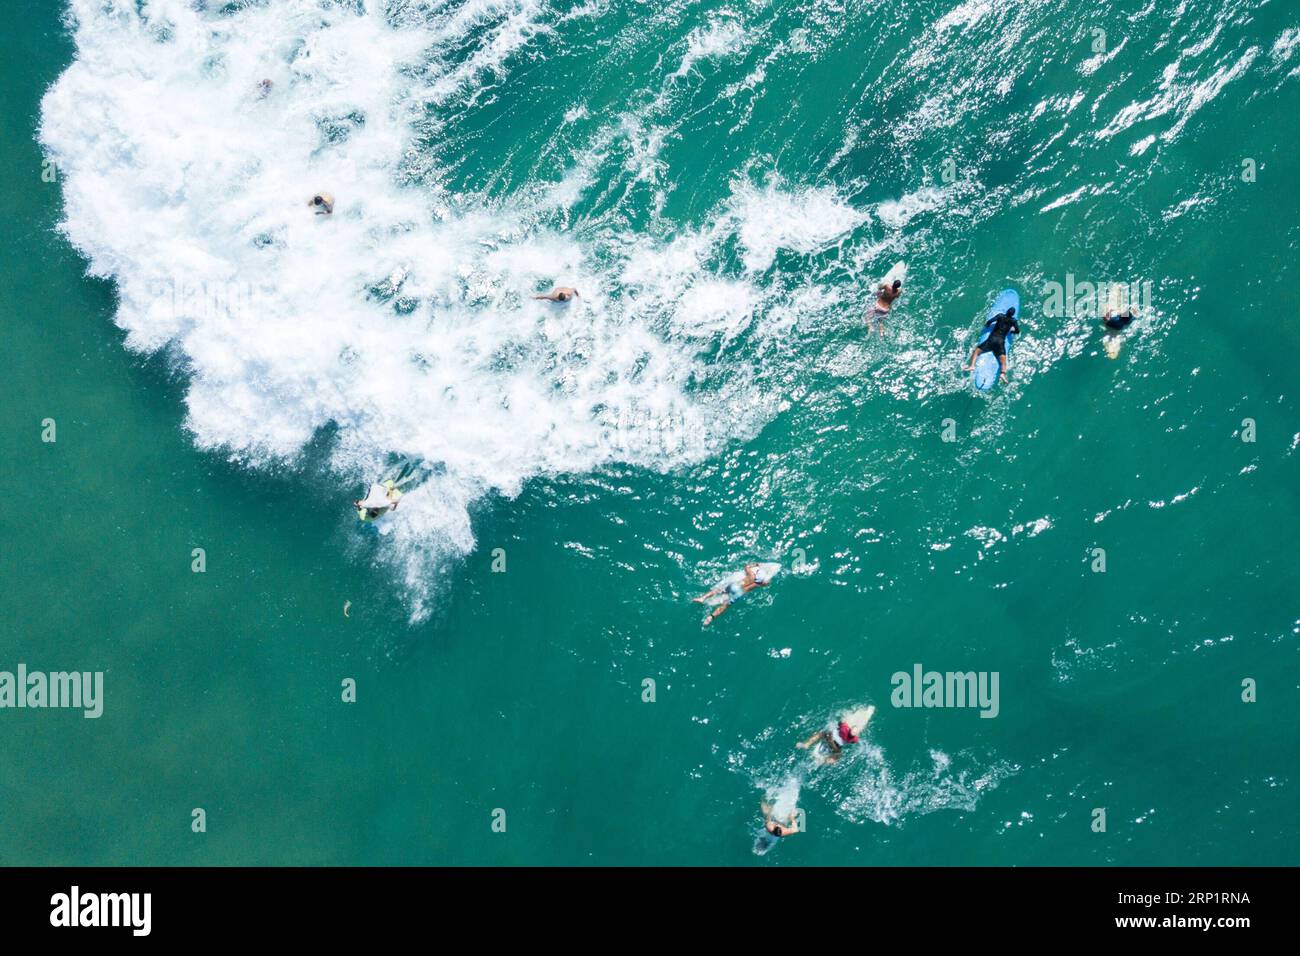 180721) -- TEL AVIV, July 21, 2018 -- People surf off the coast of  Mediterranean in Tel Aviv, Israel, on July 21, 2018. Because of the  relatively warm water temperature in the